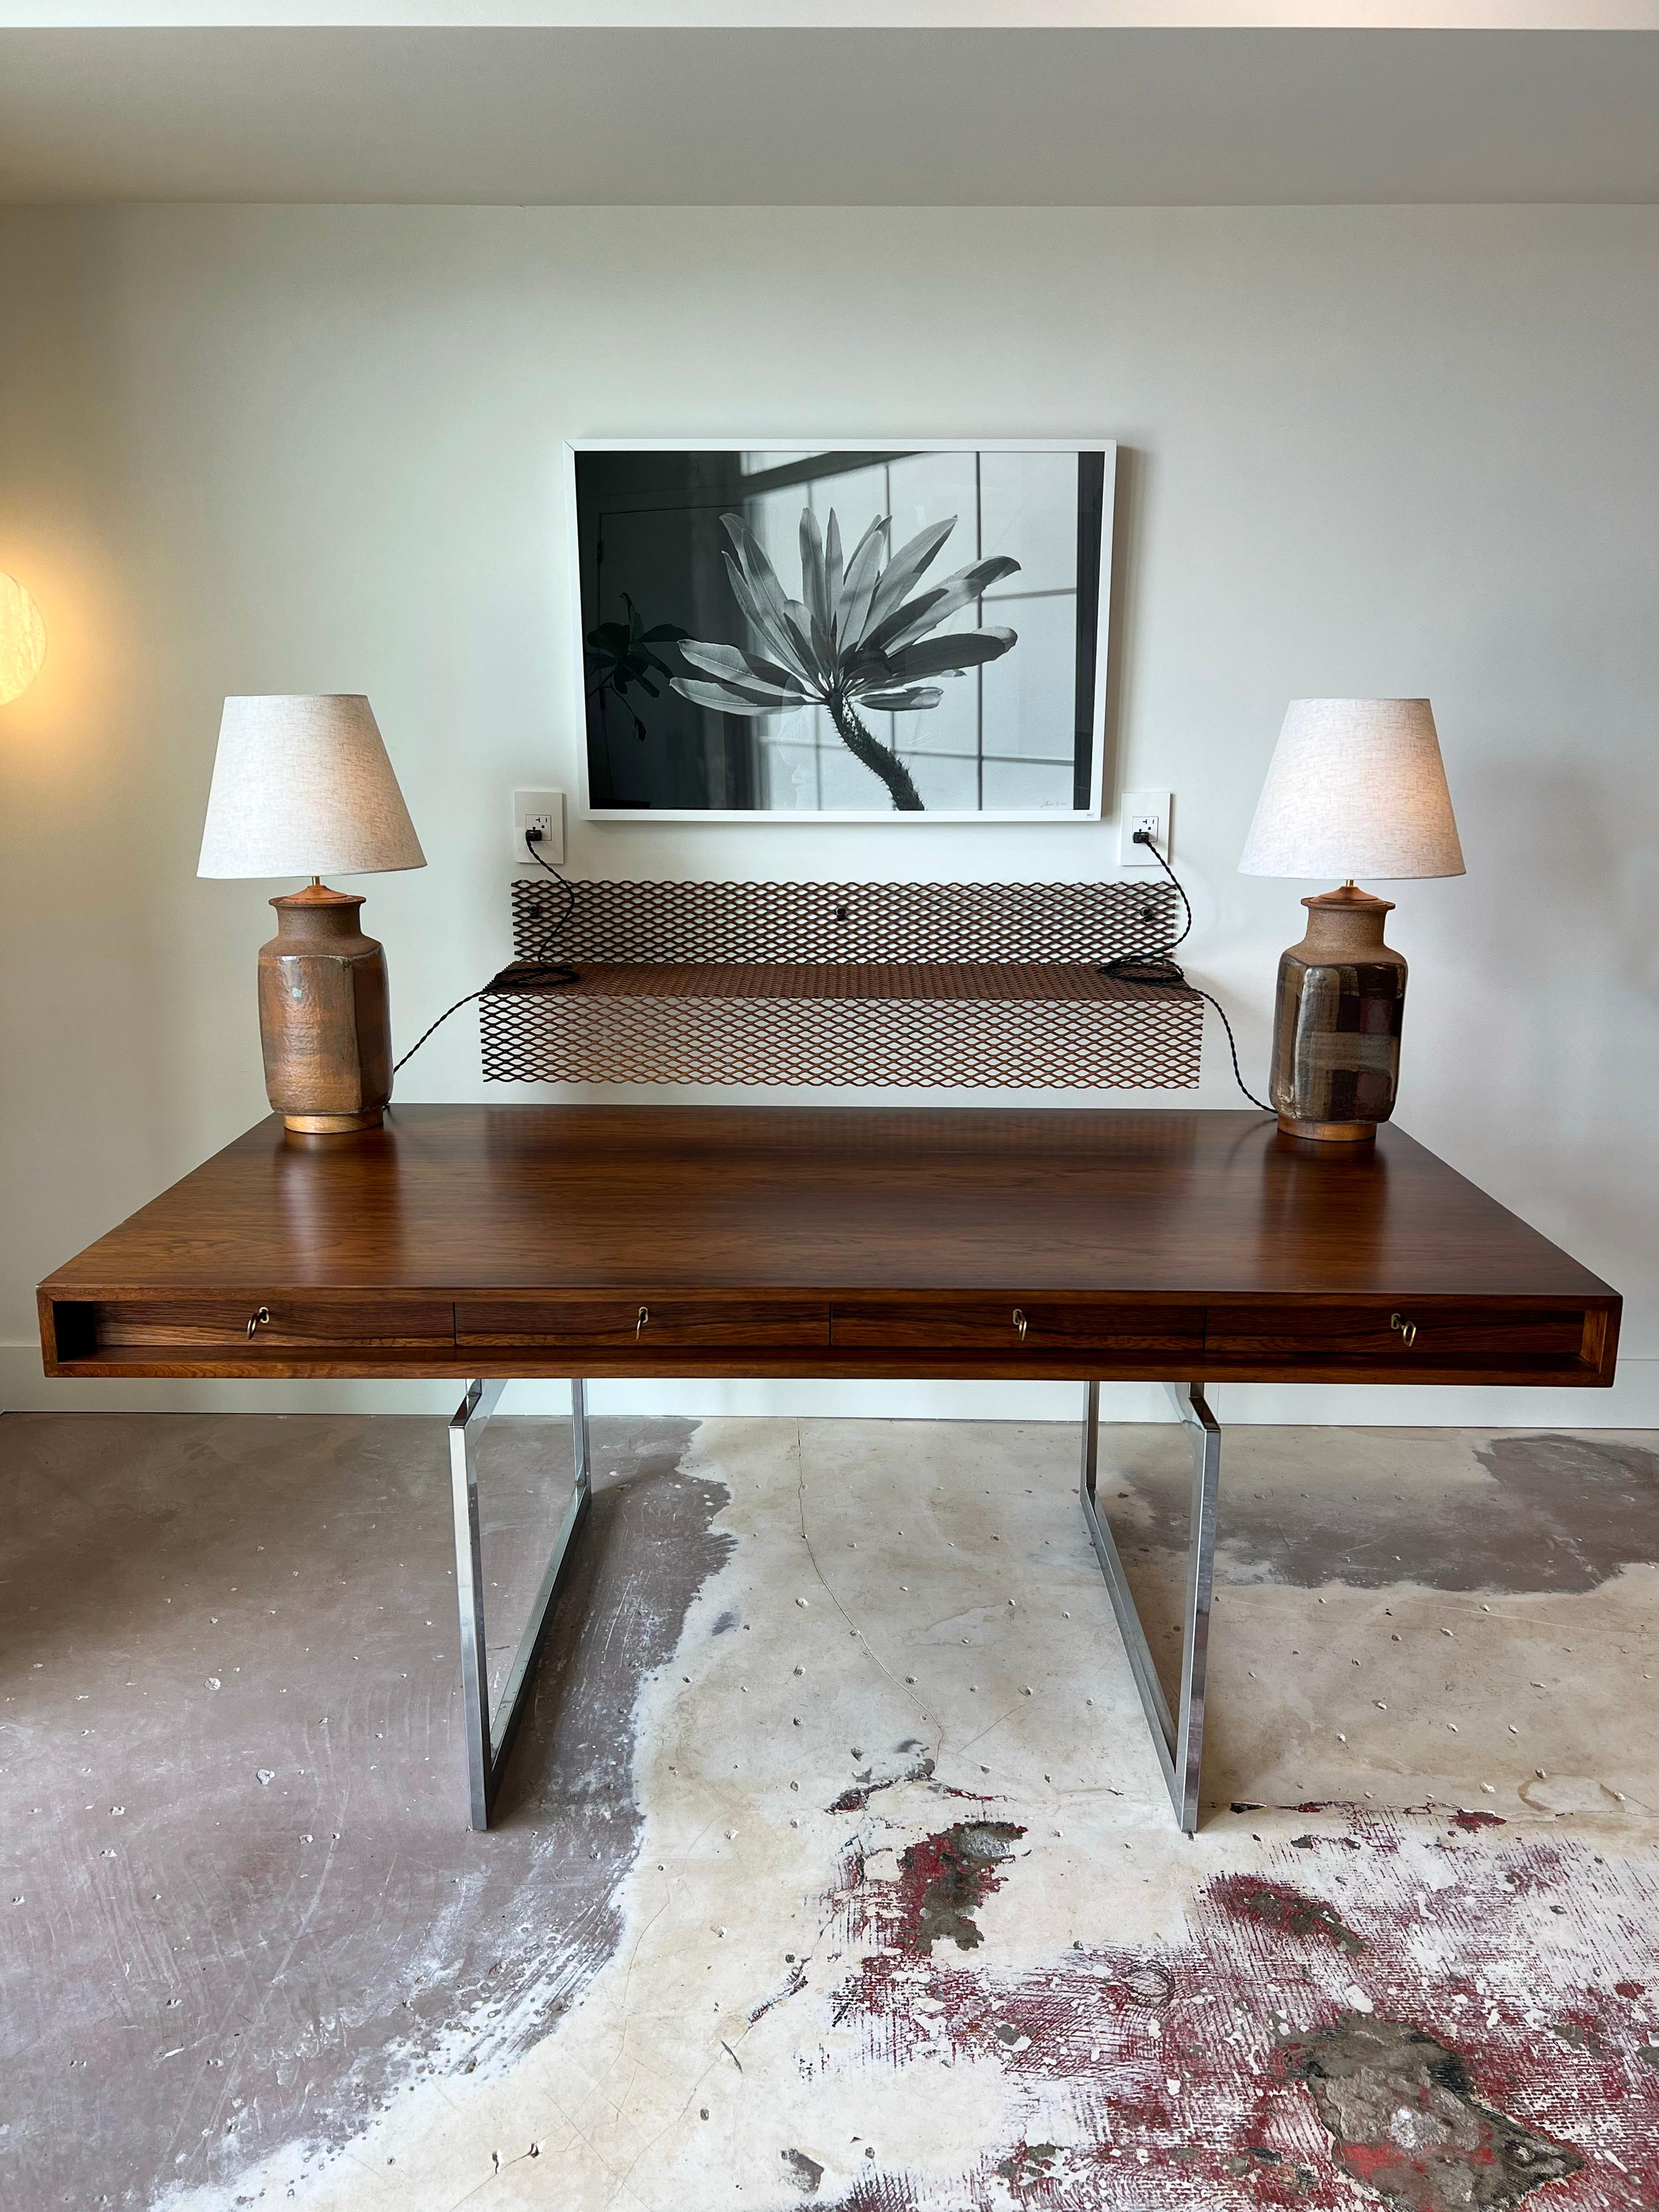 Vintage Executive Desk / Working Table by Bodil Kjaer for E. Pedersen & Son. Beautiful grain and contrast in the rosewood surface on this classic and important example of modernist design. Chrome base has some patina and is in original condition